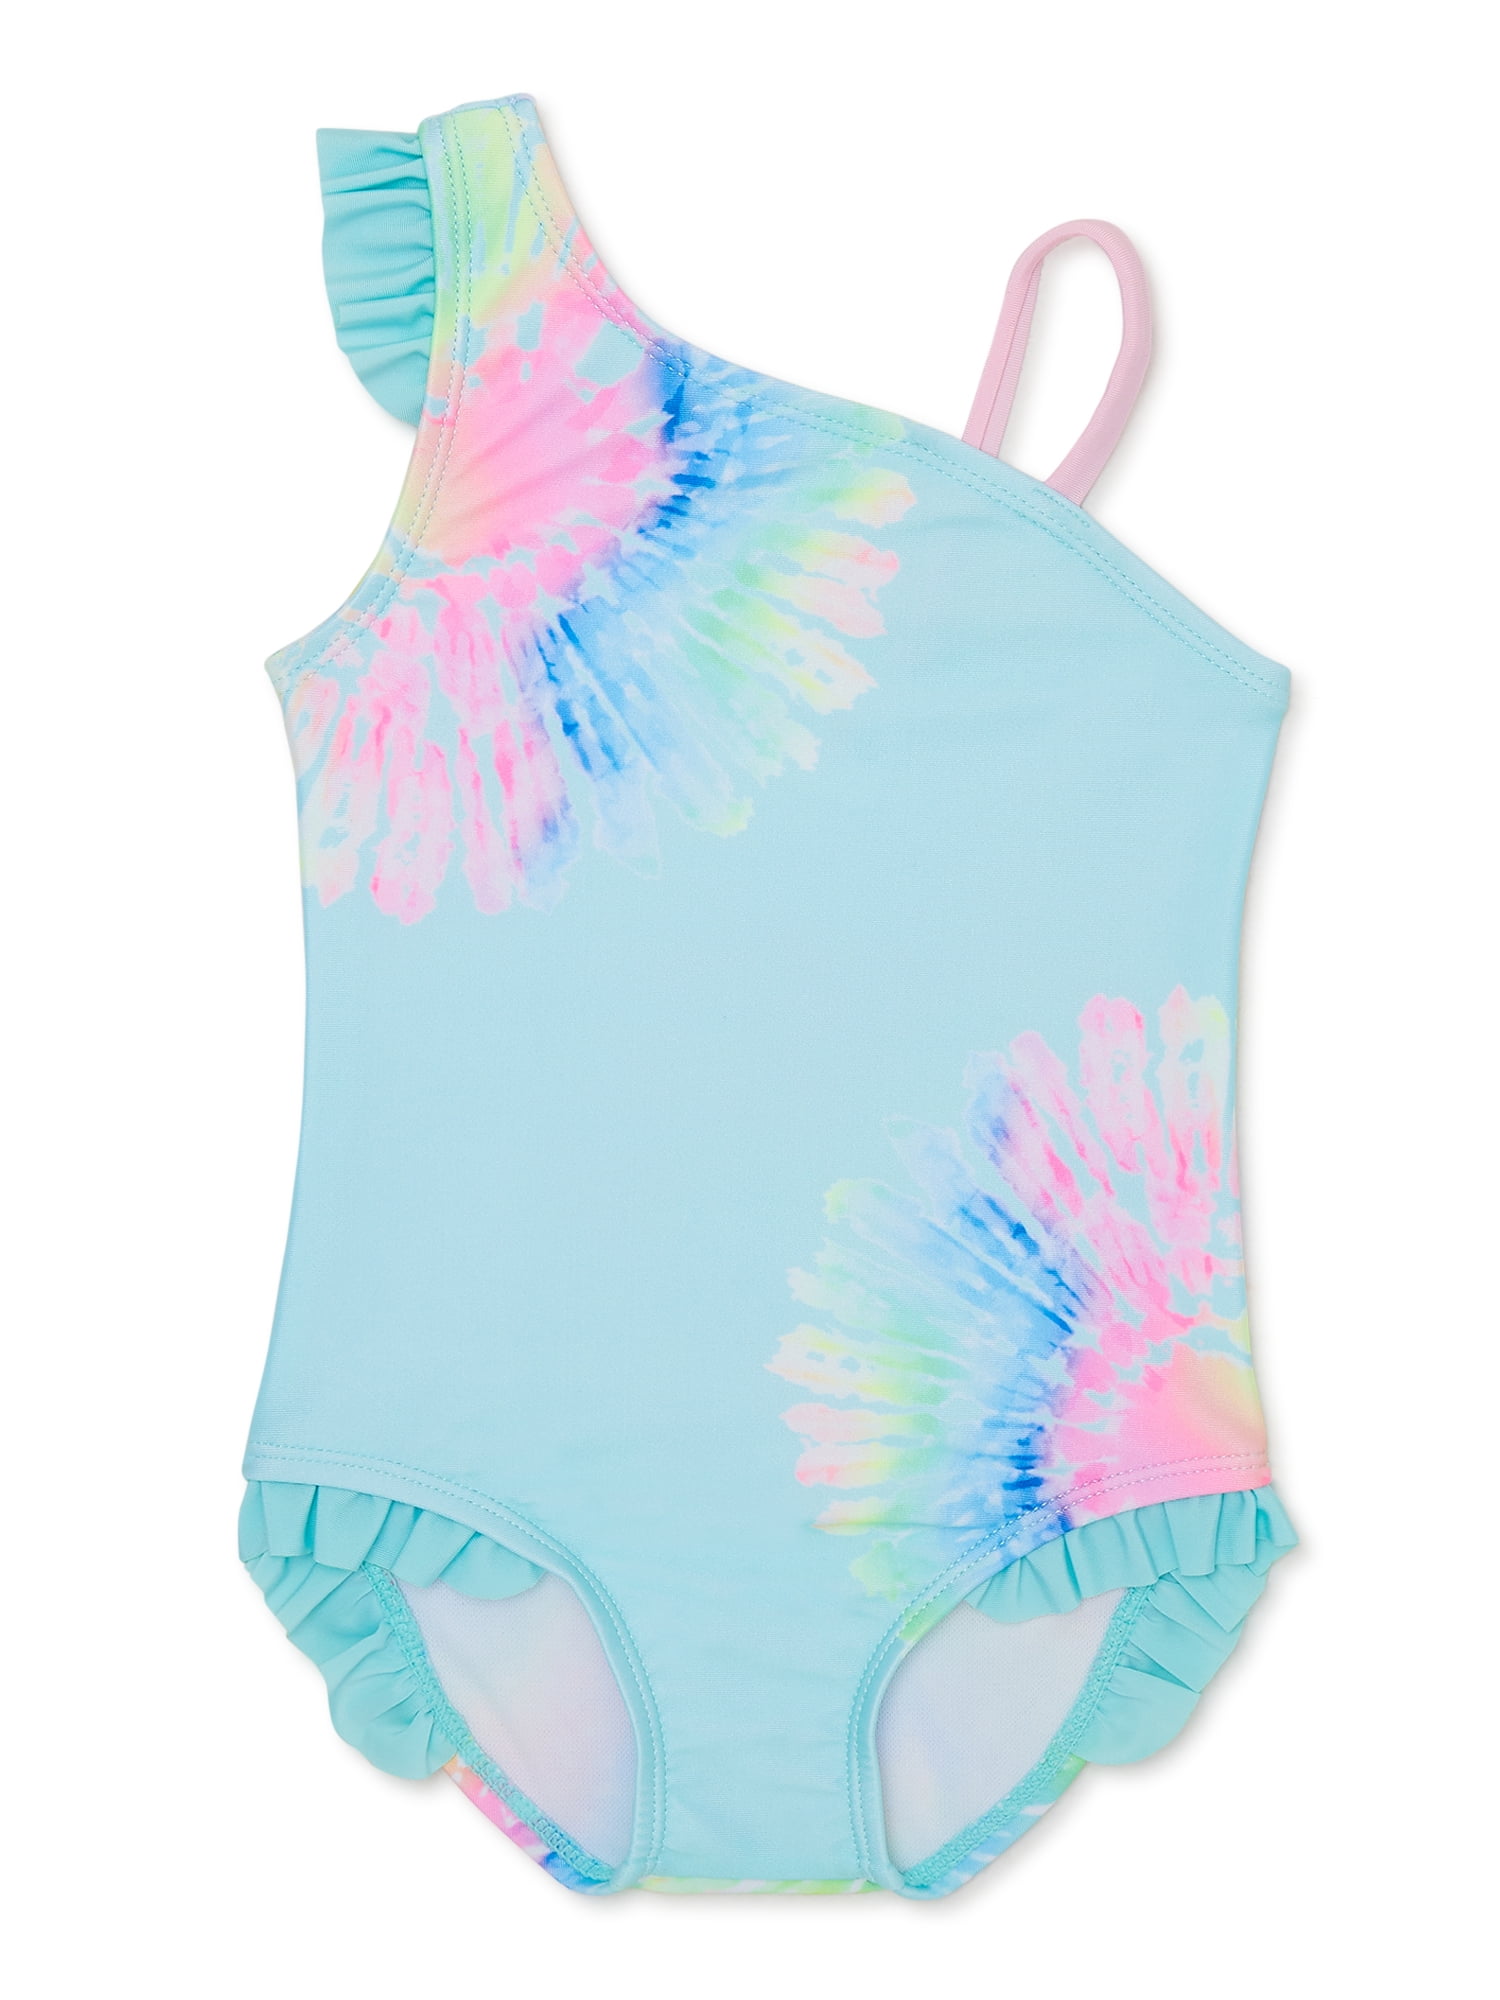 Shelloha Toddler Girl One-Piece Swimsuit with UPF 50+, Sizes 12M-5T ...